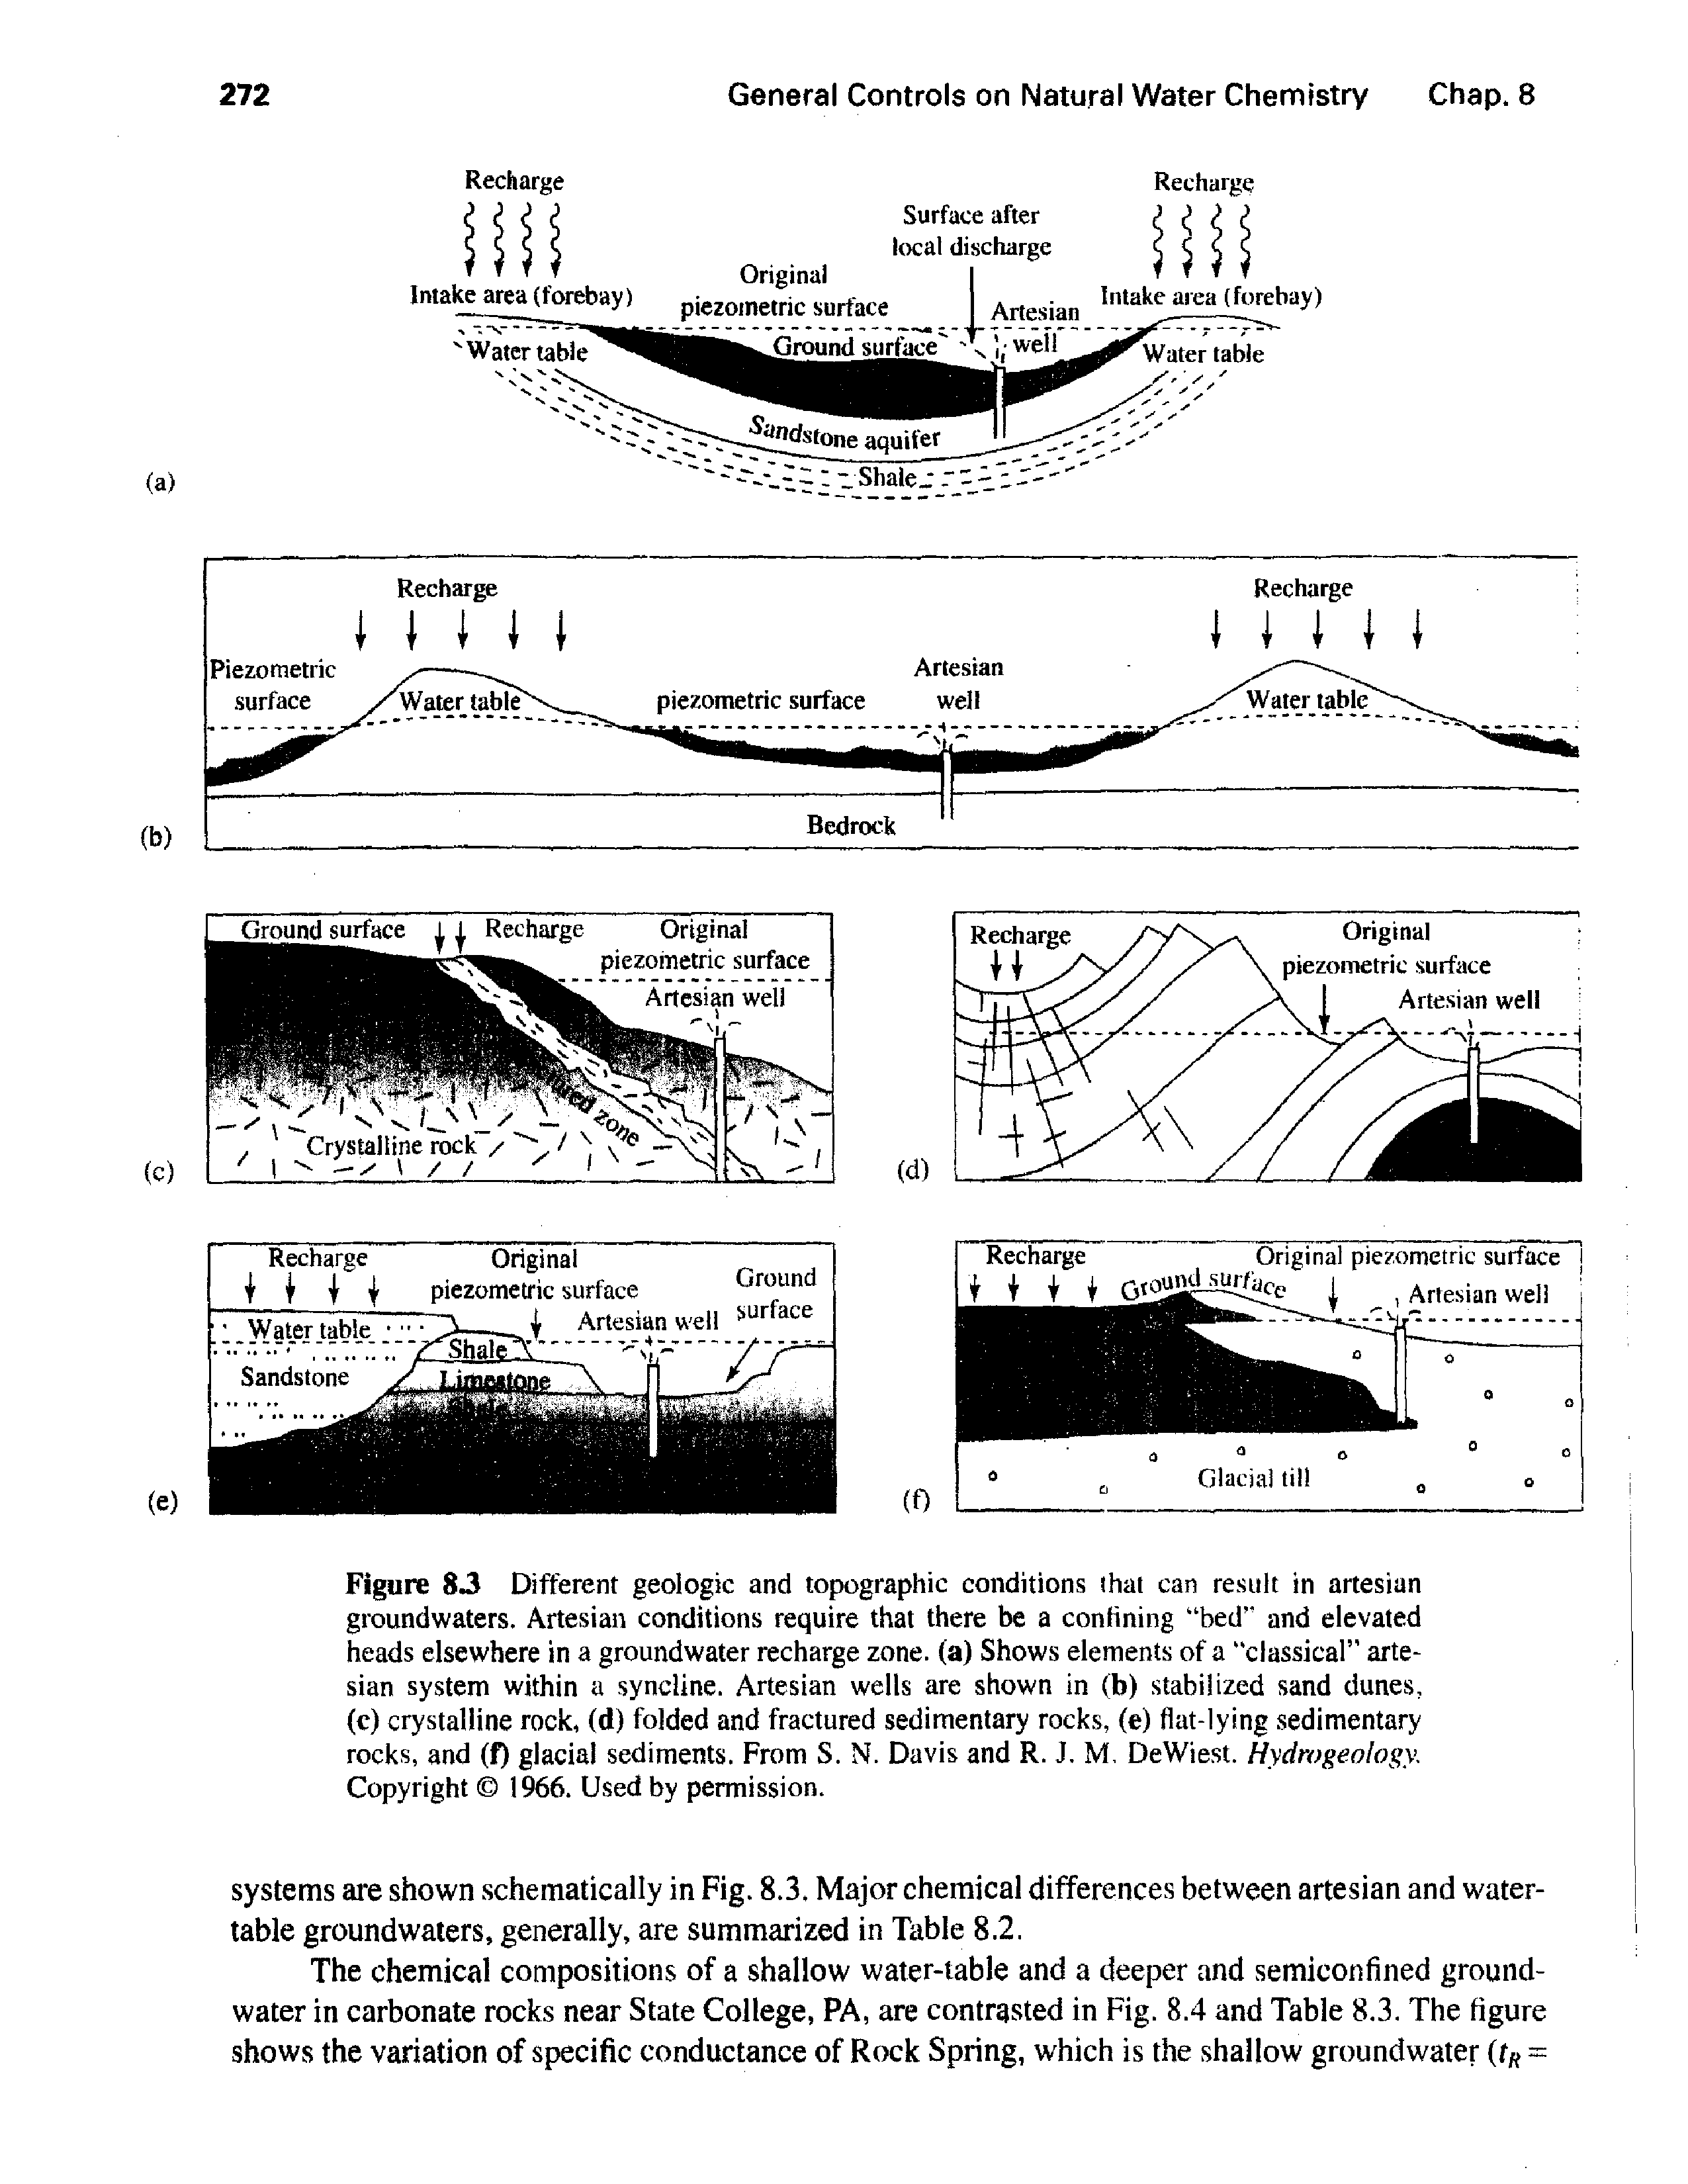 Figure 83 Different geologic and topographic conditions that can result in artesian groundwaters. Artesian conditions require that there be a confining bed and elevated heads elsewhere in a groundwater recharge zone, (a) Shows elements of a "classical artesian system within a syncline. Artesian wells are shown in (b) stabilized sand dunes, (c) crystalline rock, (d) folded and fractured sedimentary rocks, (e) flat-lying sedimentary rocks, and (f) glacial sediments. From S. N. Davis and R. J. M, DeWiest. Hydrogeology. Copyright 1966. Used by permission.